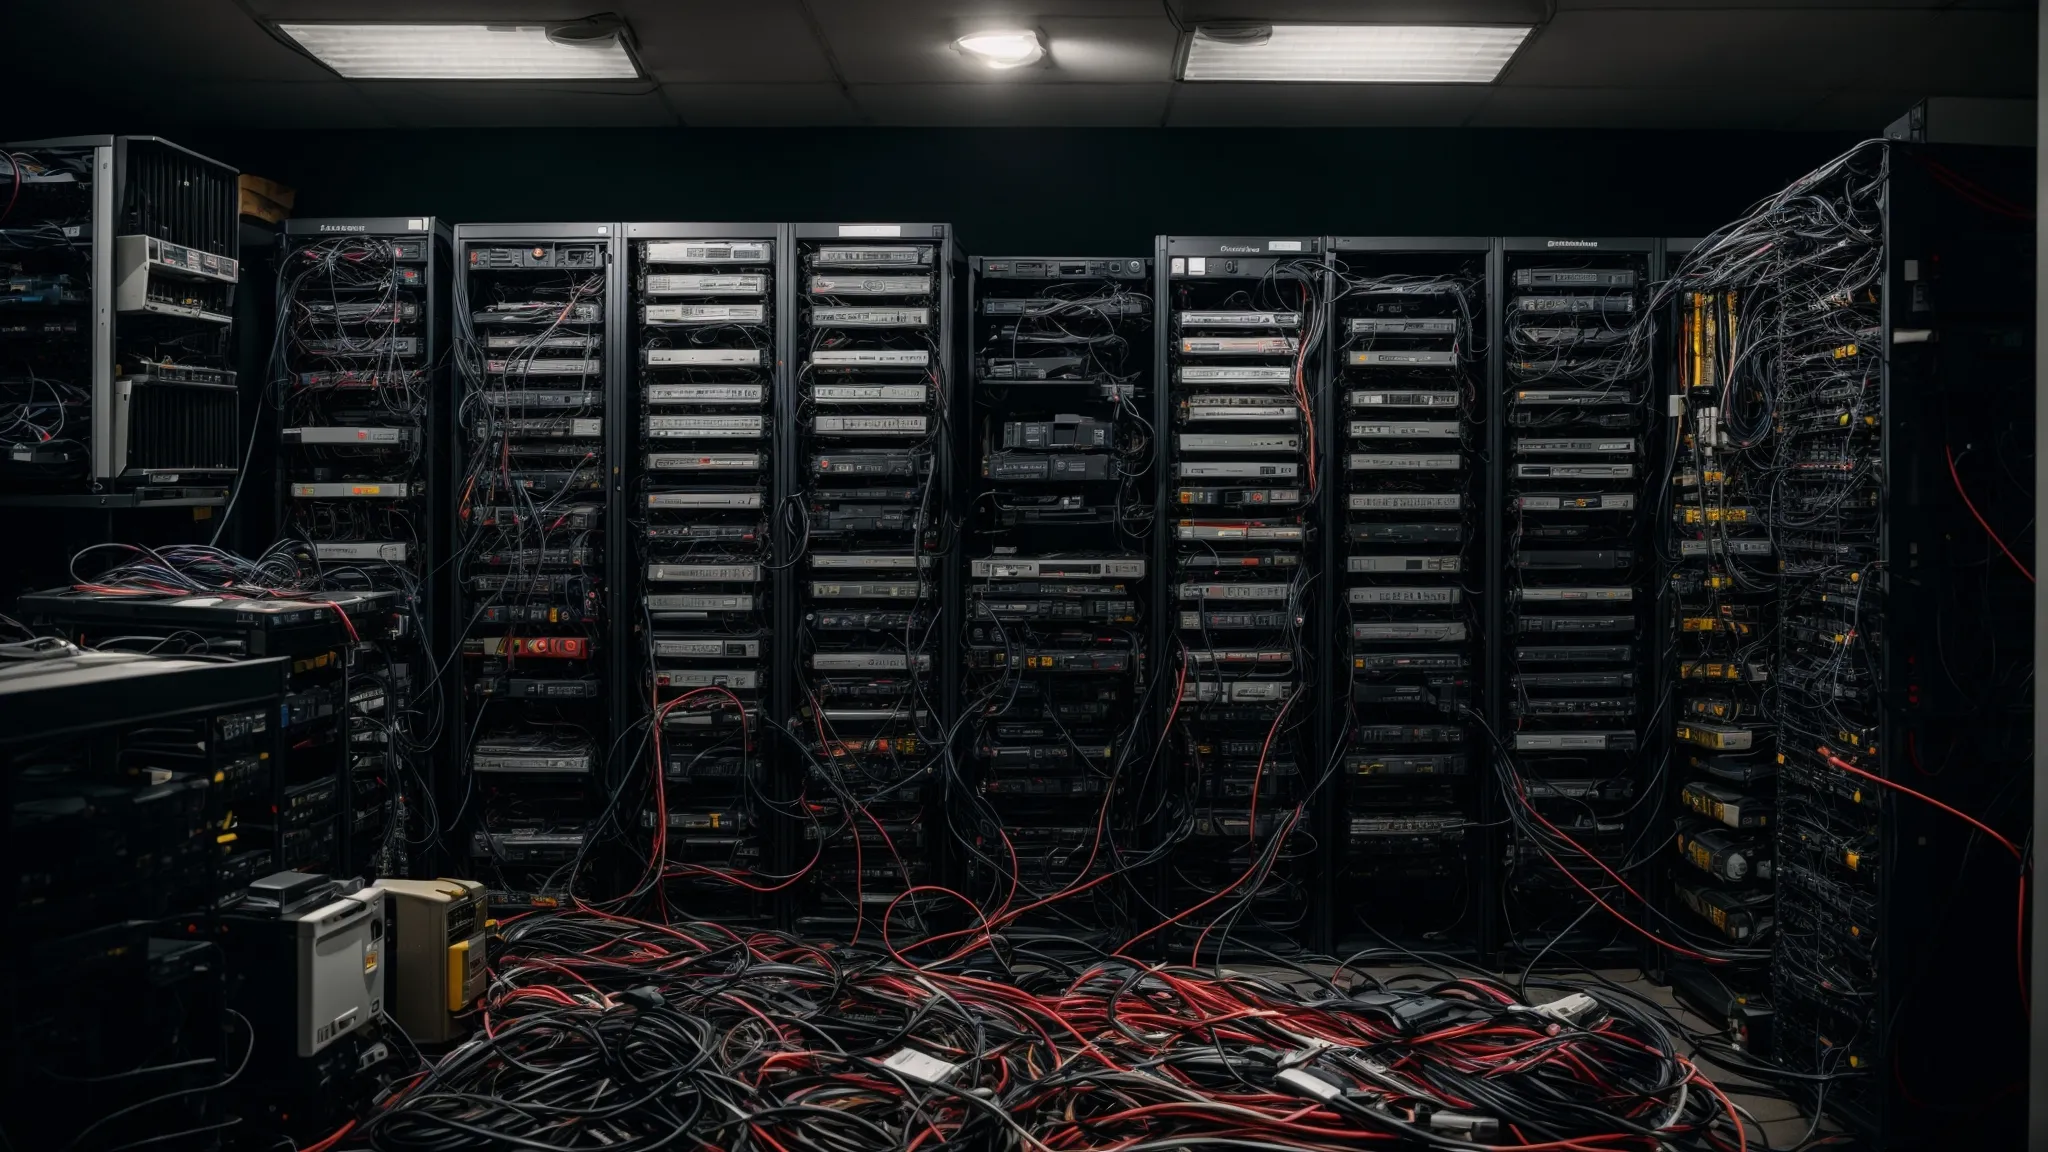 a cluttered, disorganized server room with cables scattered everywhere.